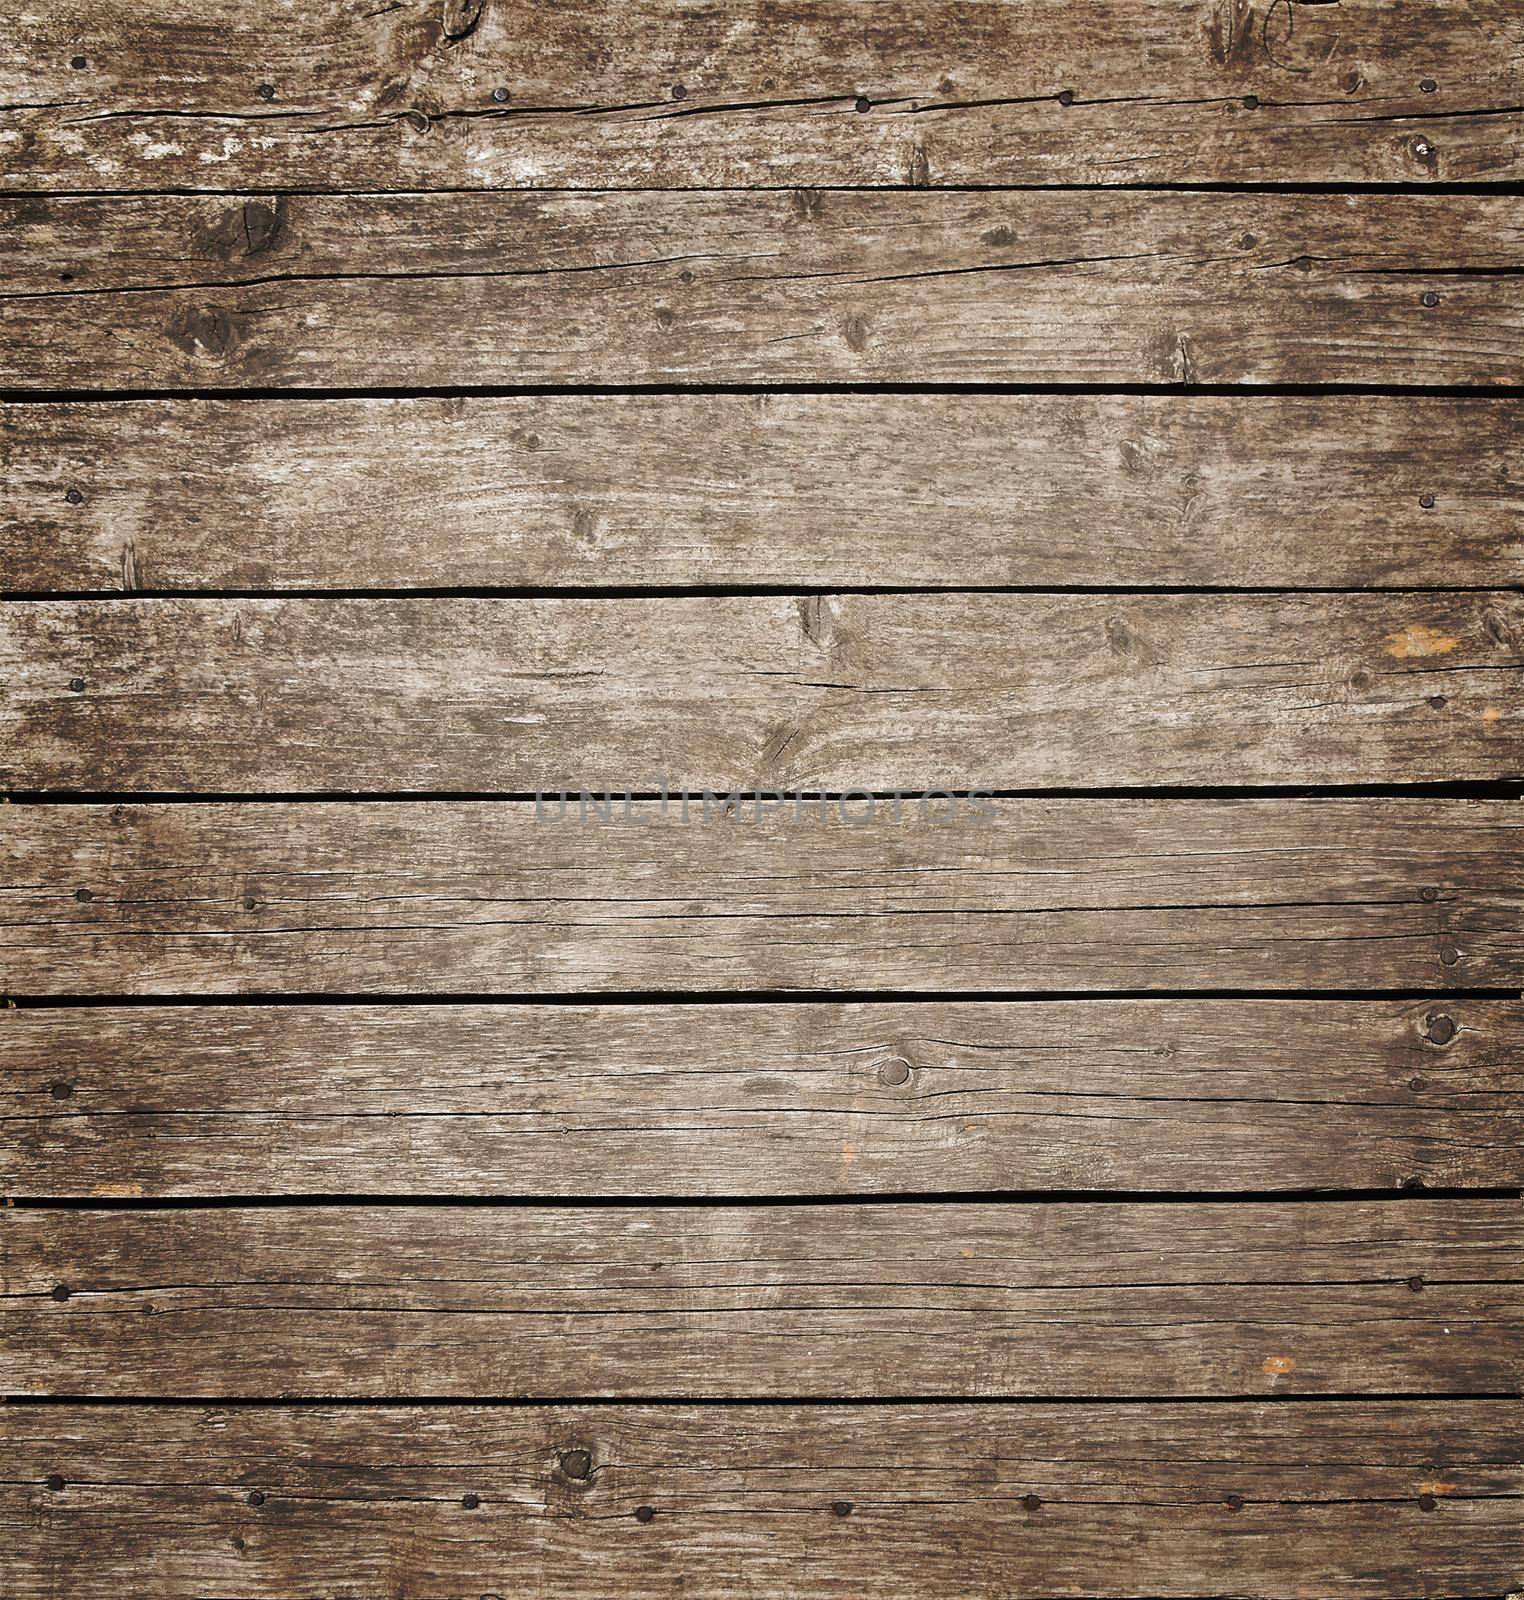 Square old vintage rustic aged antique wooden sepia panel with horizontal gaps, planks and chinks